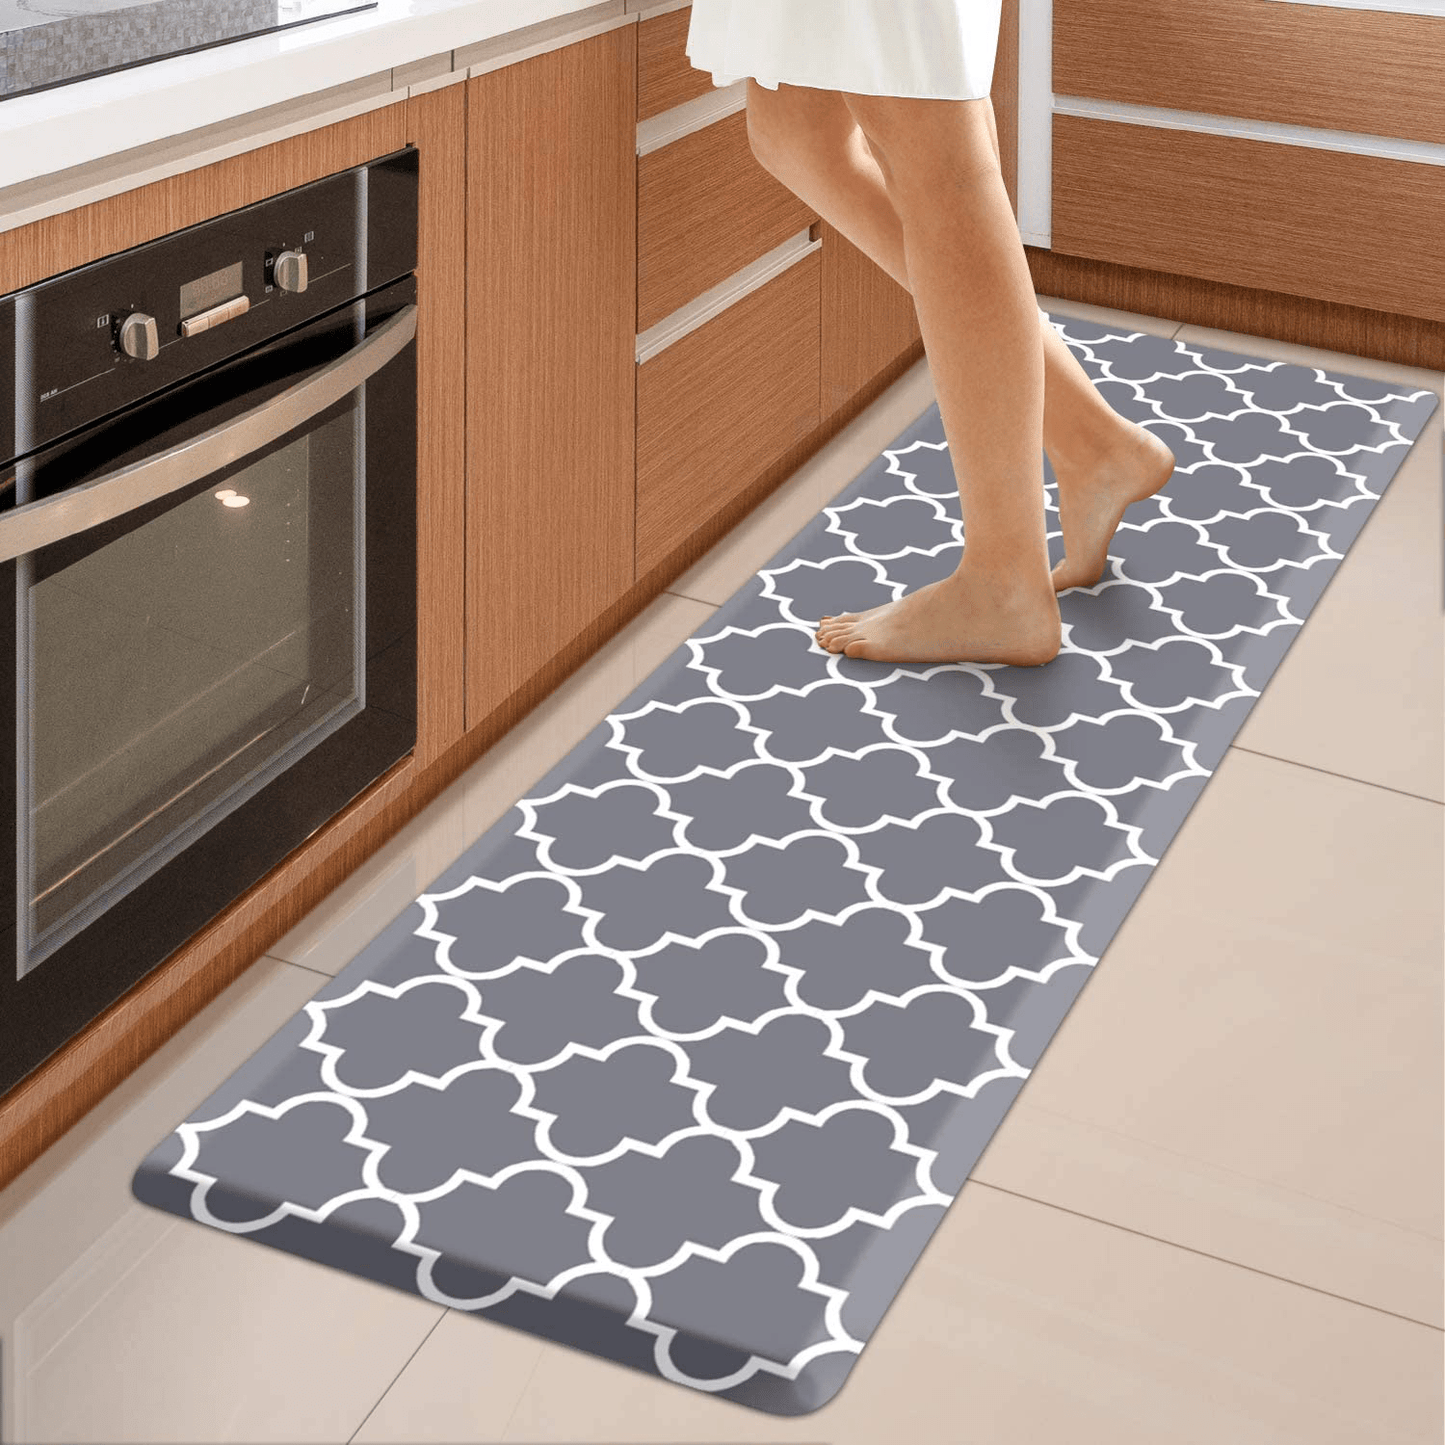 https://kol.pet/cdn/shop/products/wiselife-kitchen-mat-cushioned-anti-fatigue-kitchen-rug-17-3-x-39-non-slip-waterproof-kitchen-mats-and-rugs-heavy-duty-pvc-ergonomic-comfort-mat-for-kitchen-floor-home-office-sink-lau_5dd879ce-7ef5-4dfa-84c8-13321f693008_1445x.png?v=1675681213